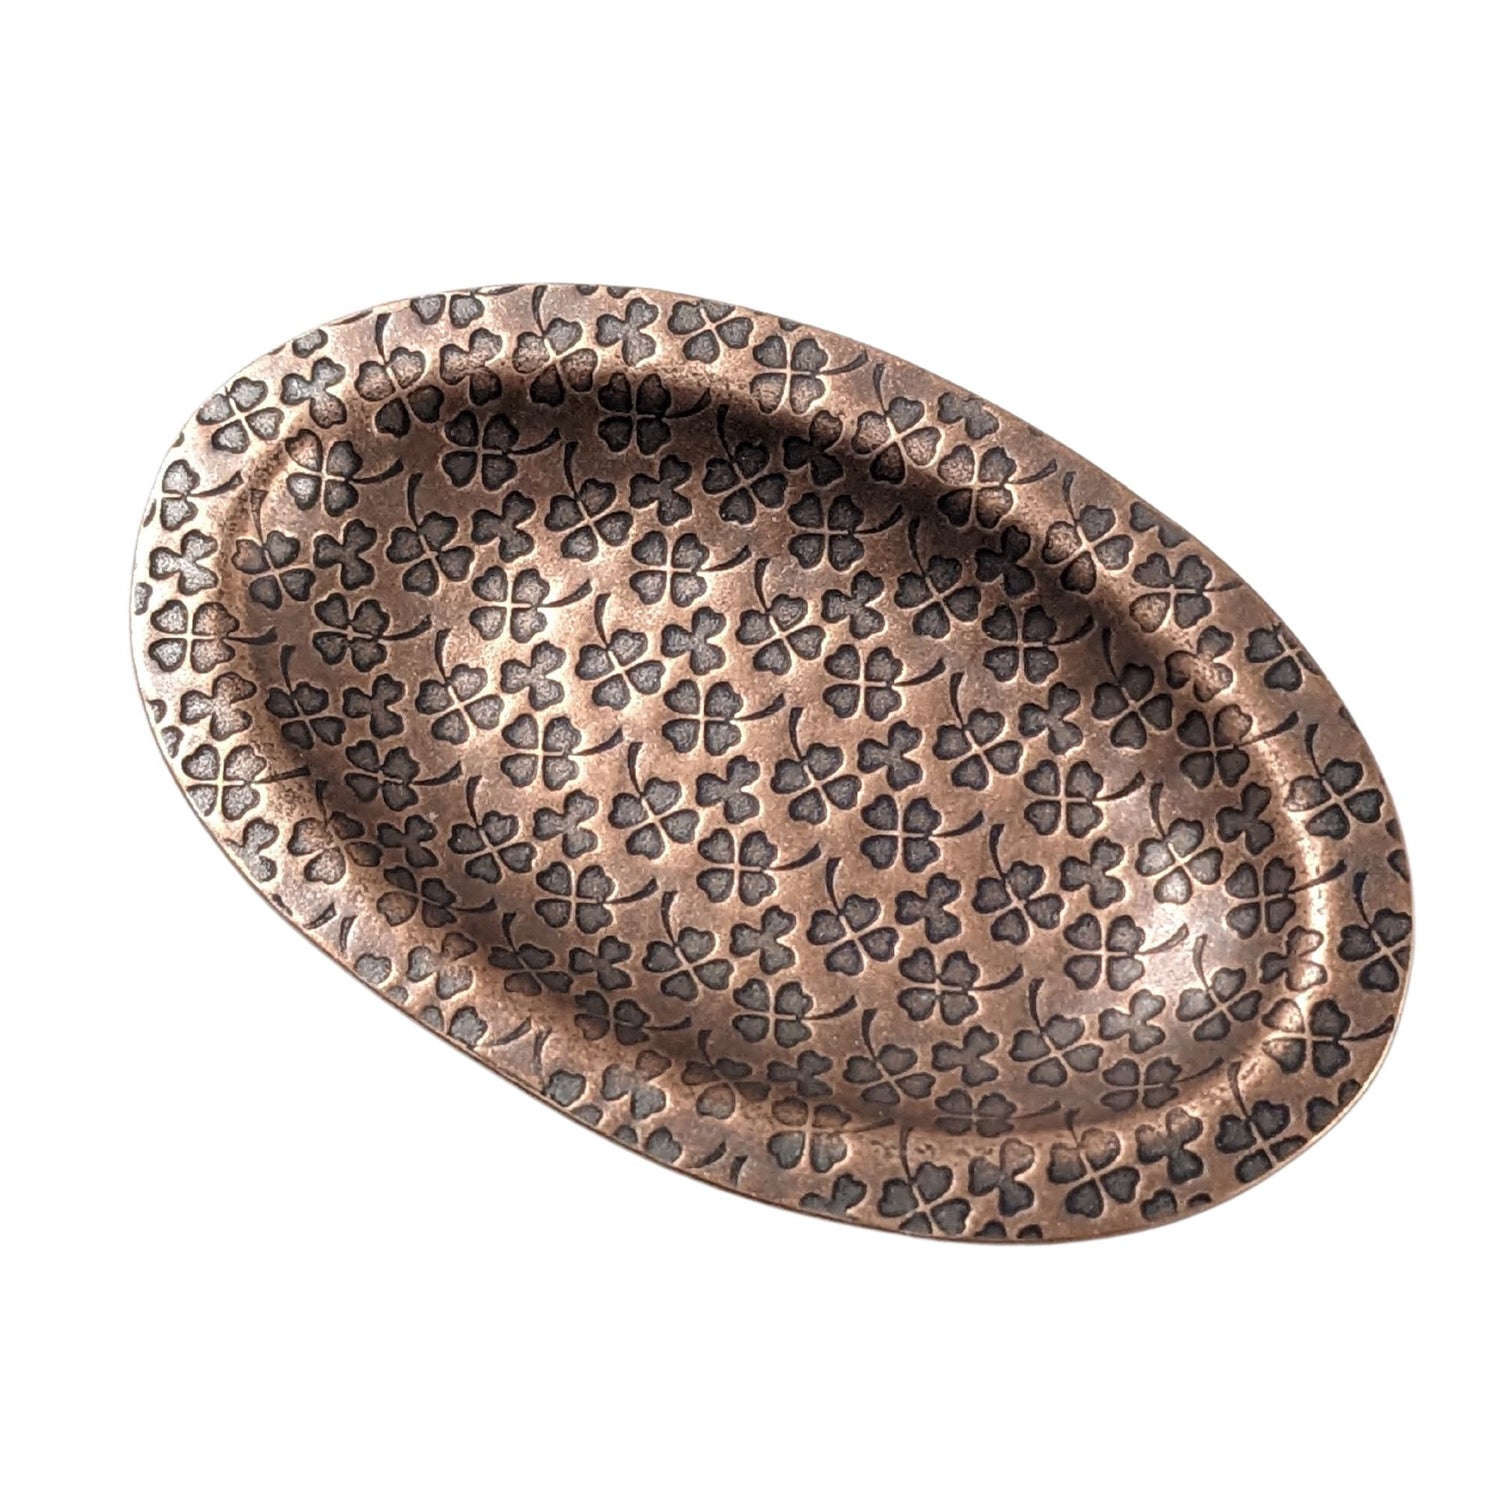 An oval copper ring dish with a raised edge. The dish has an impressed pattern of four leaf clovers.